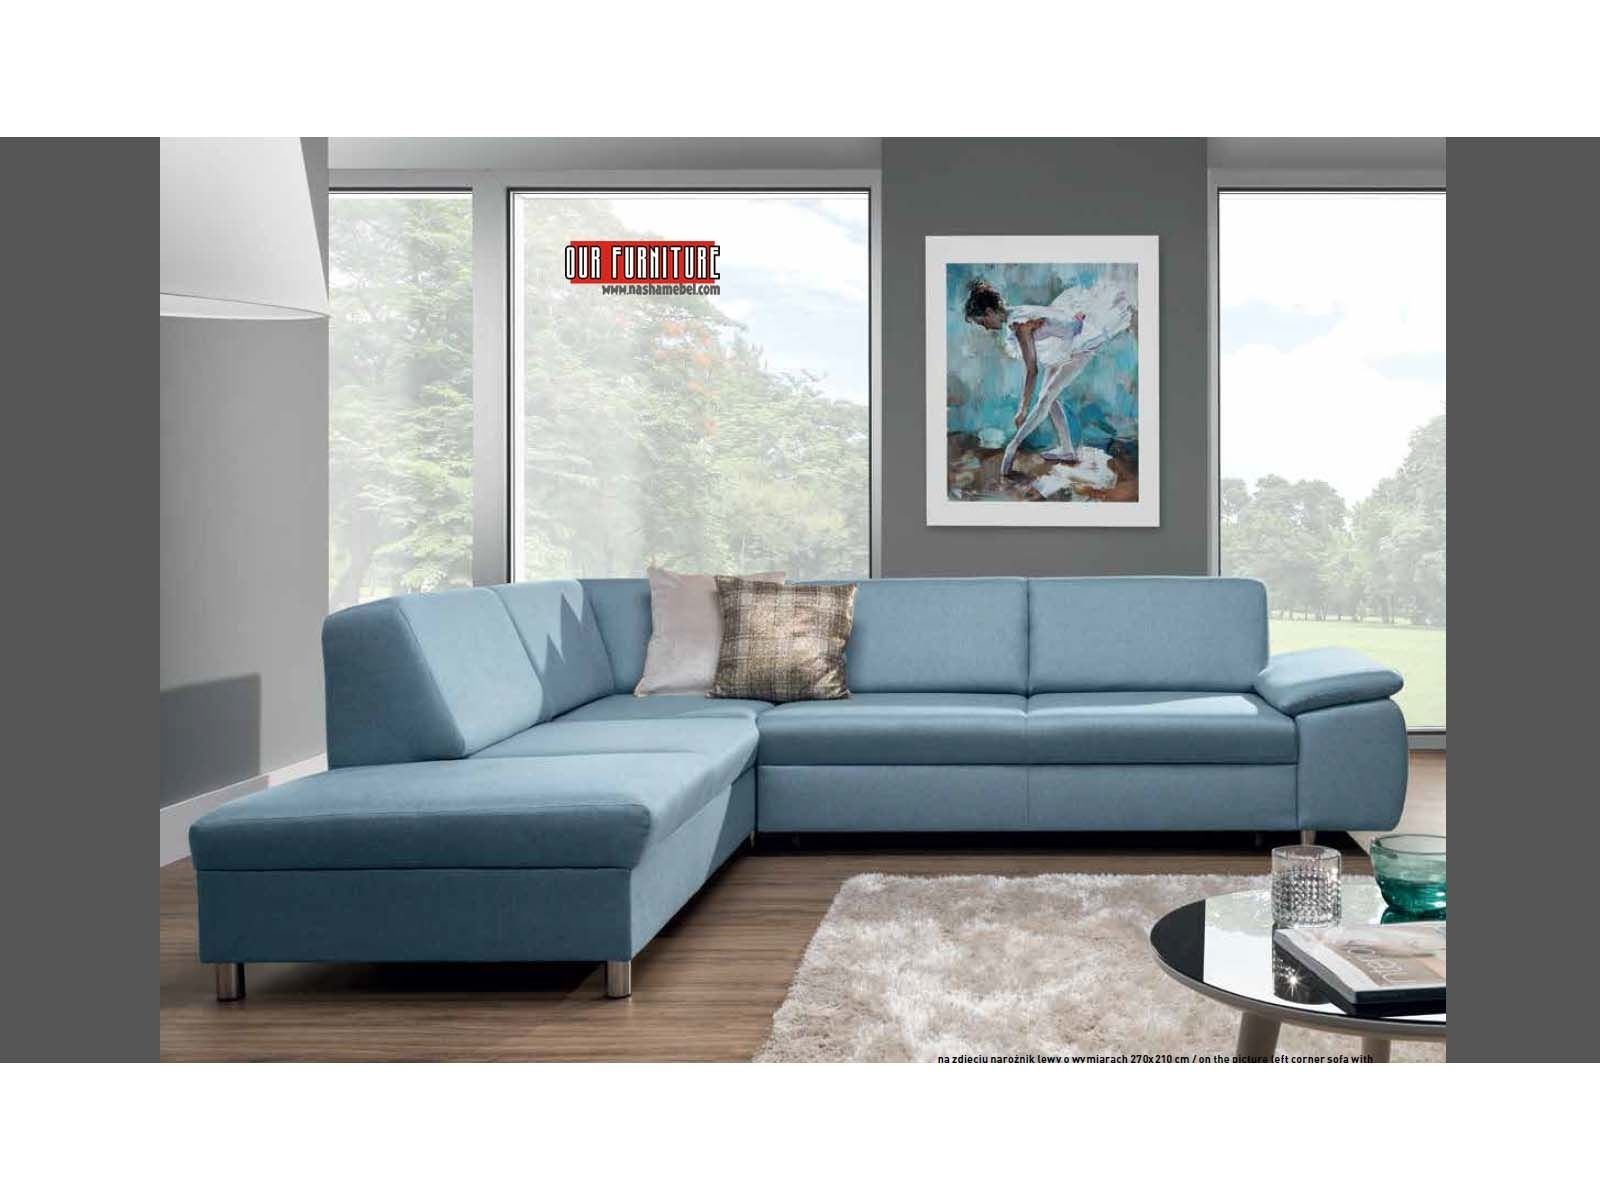 Niagara(st)sectional Sofa Bed. Intended For Niagara Sectional Sofas (Photo 4 of 10)